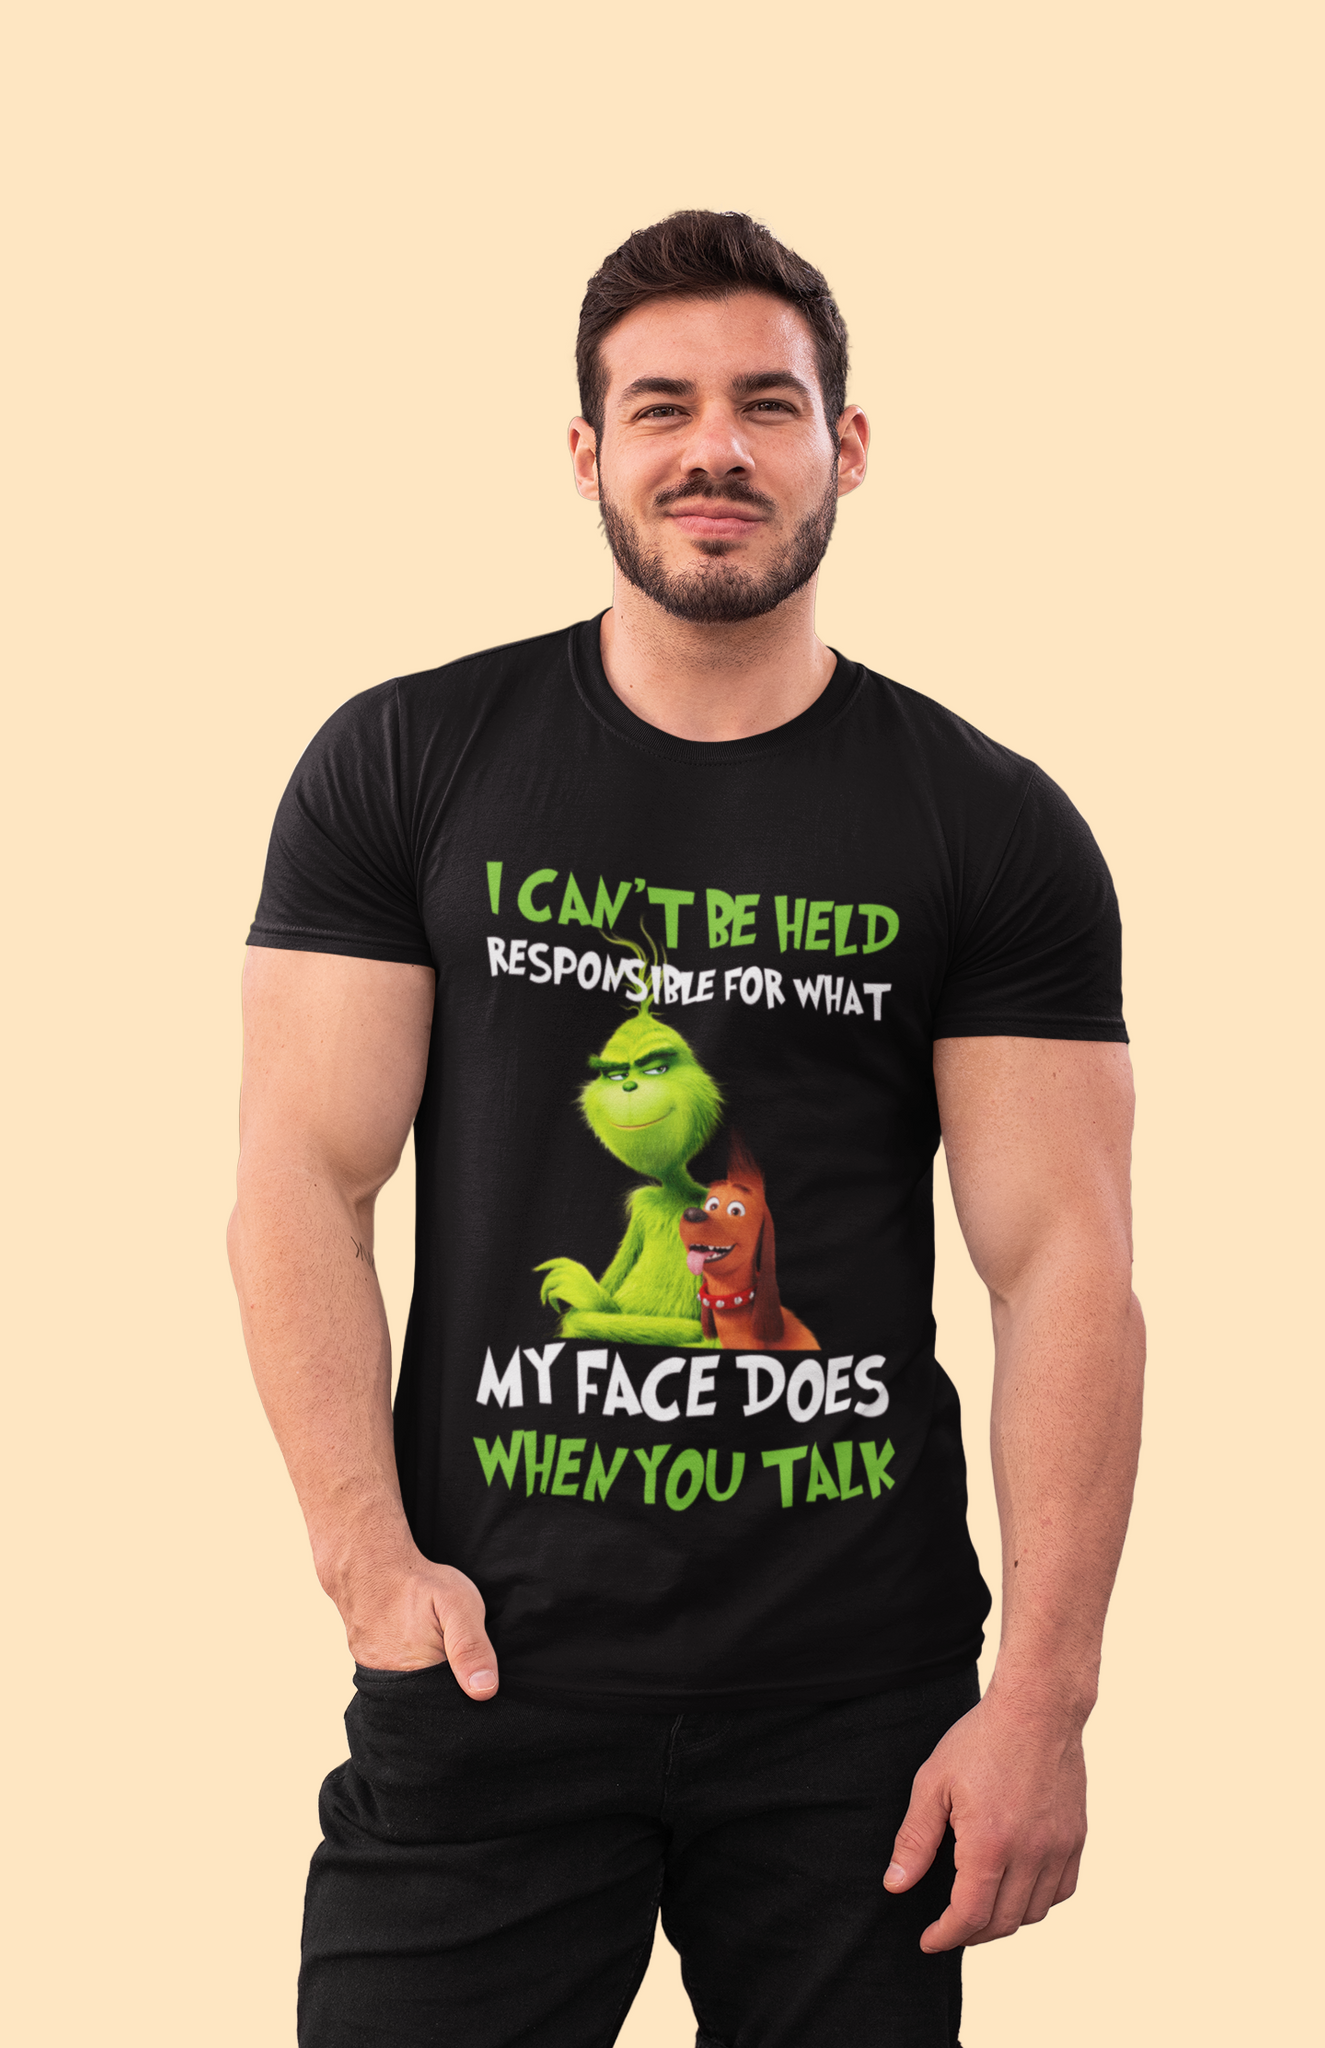 Grinch T Shirt, Gricnh And Max T Shirt, I Cant Be Held Responsible Tshirt, For What My Face Does When You Talk Shirt, Christmas Gifts